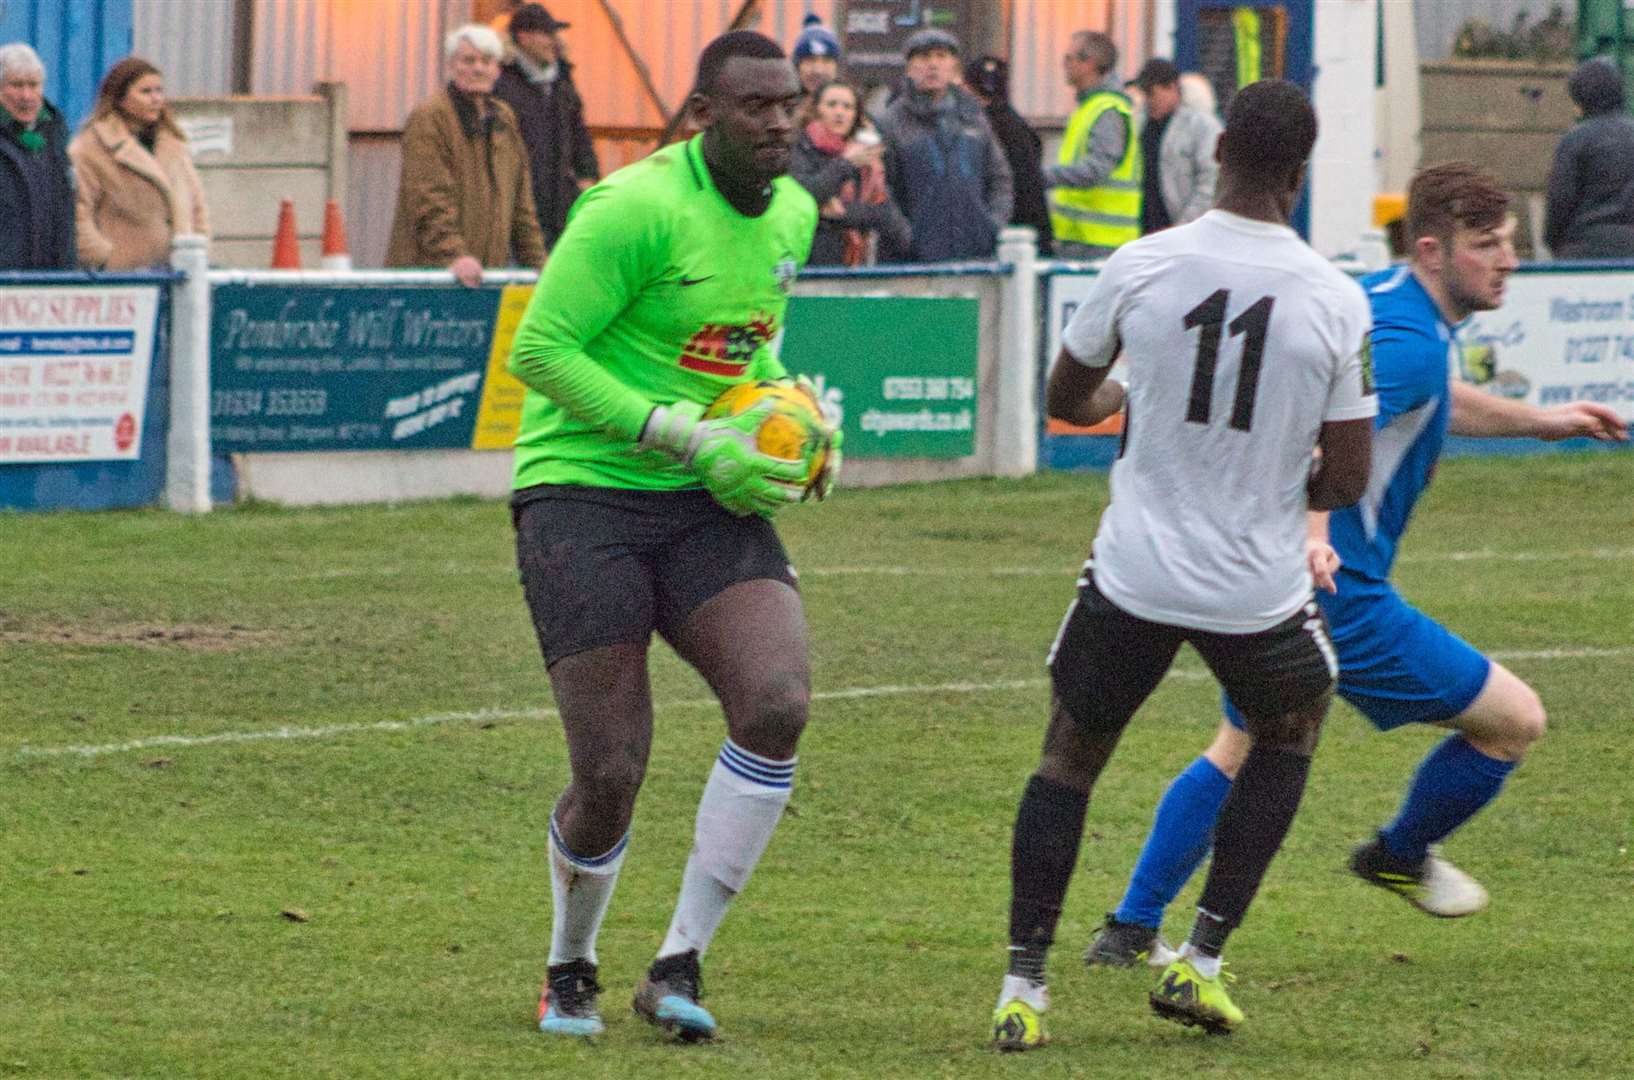 Former Herne Bay keeper George Kamurasi, now with VCD, could line-up against his old club on Tuesday